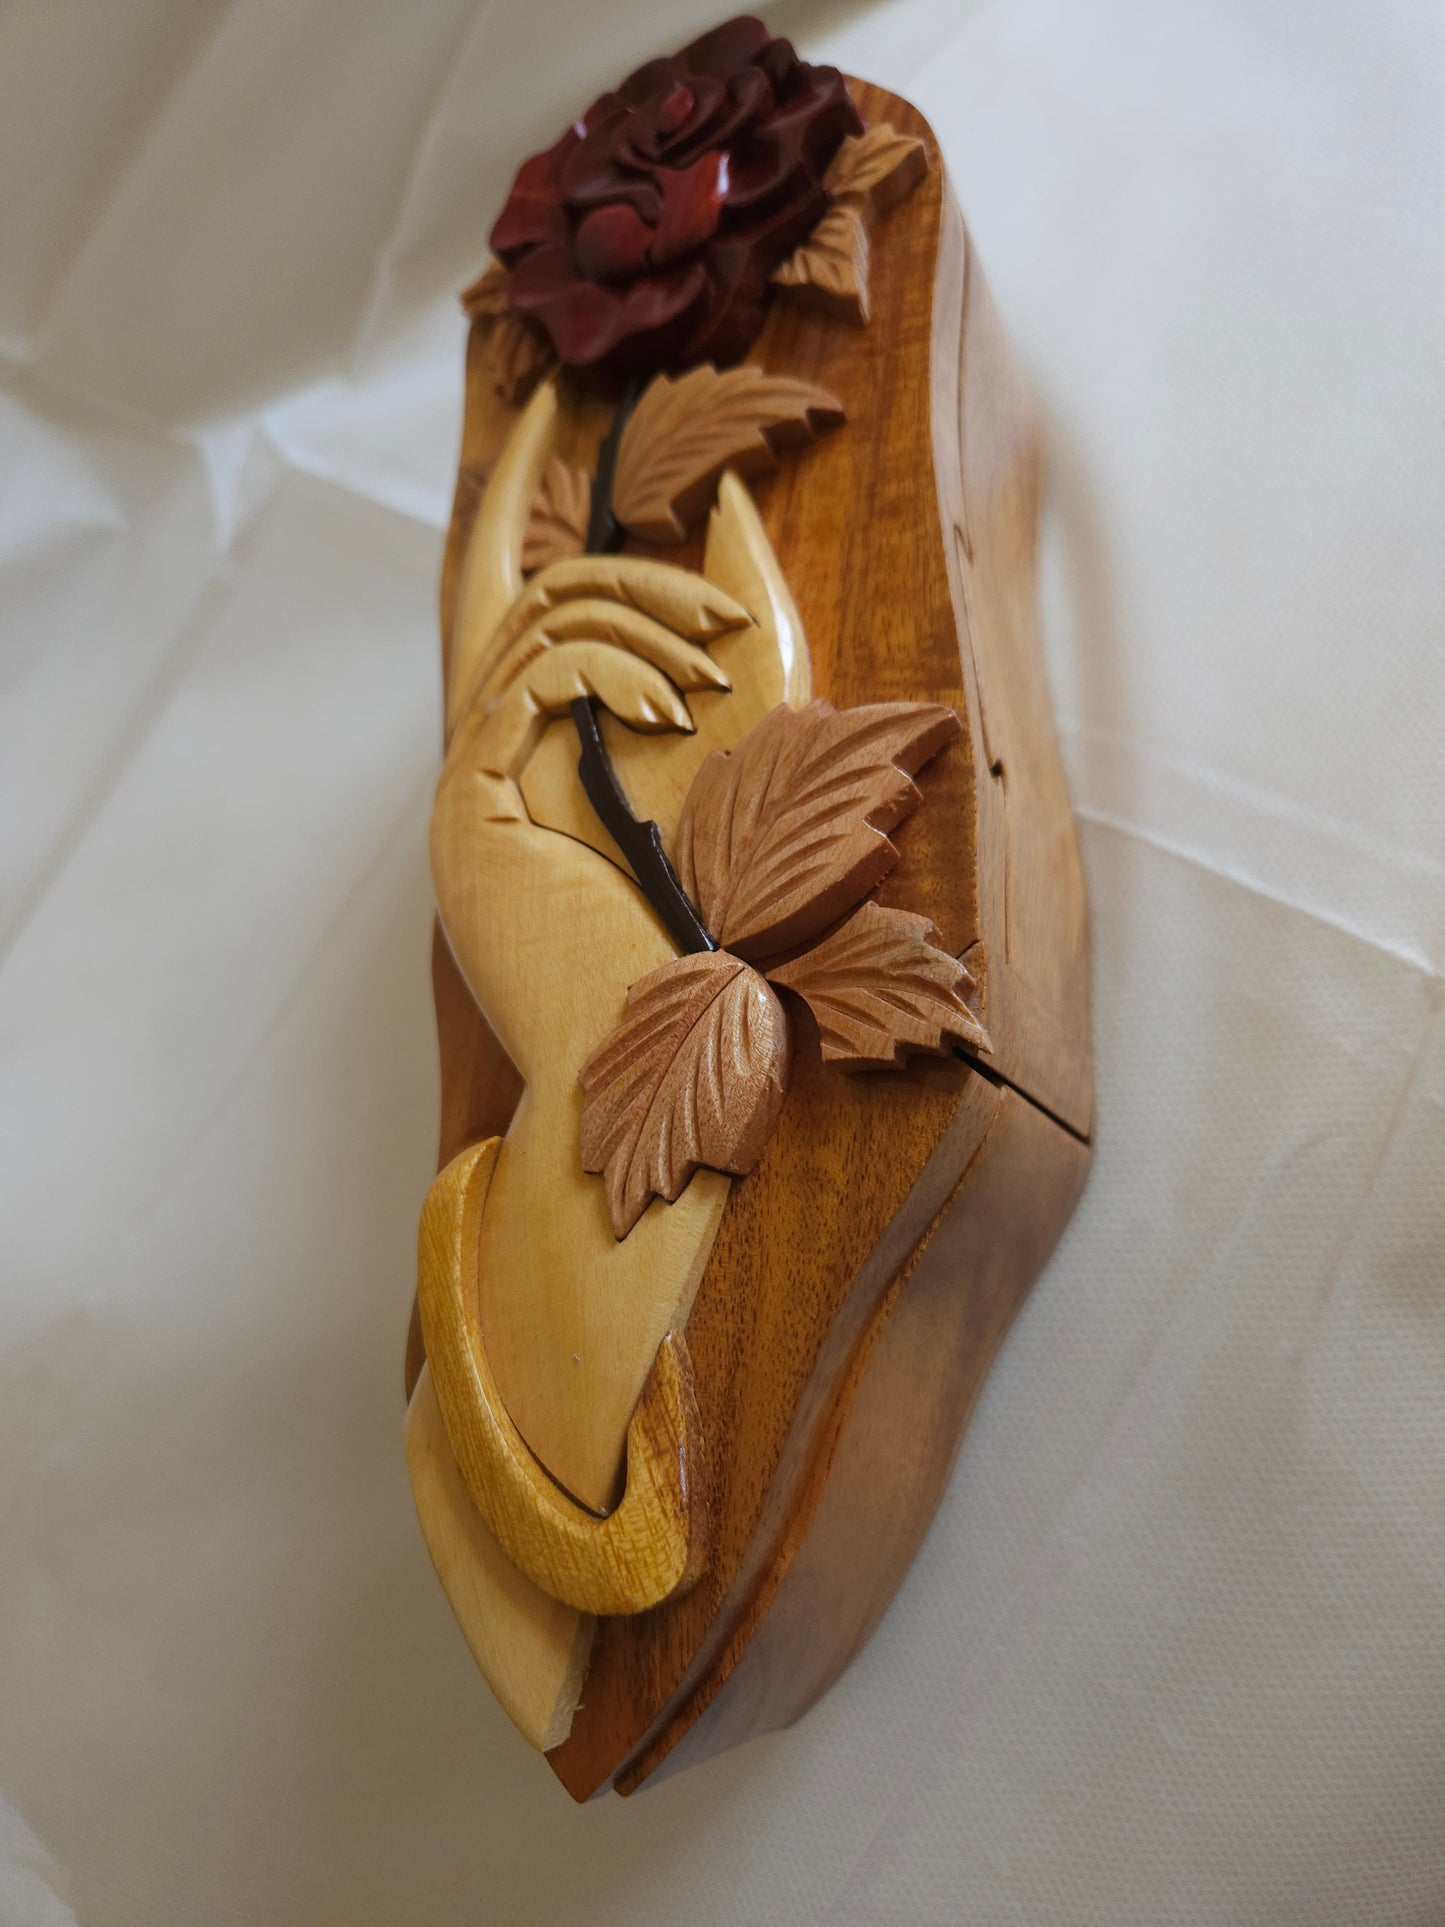 Beautifully Handcrafted Wooden Rose Love Puzzle Box